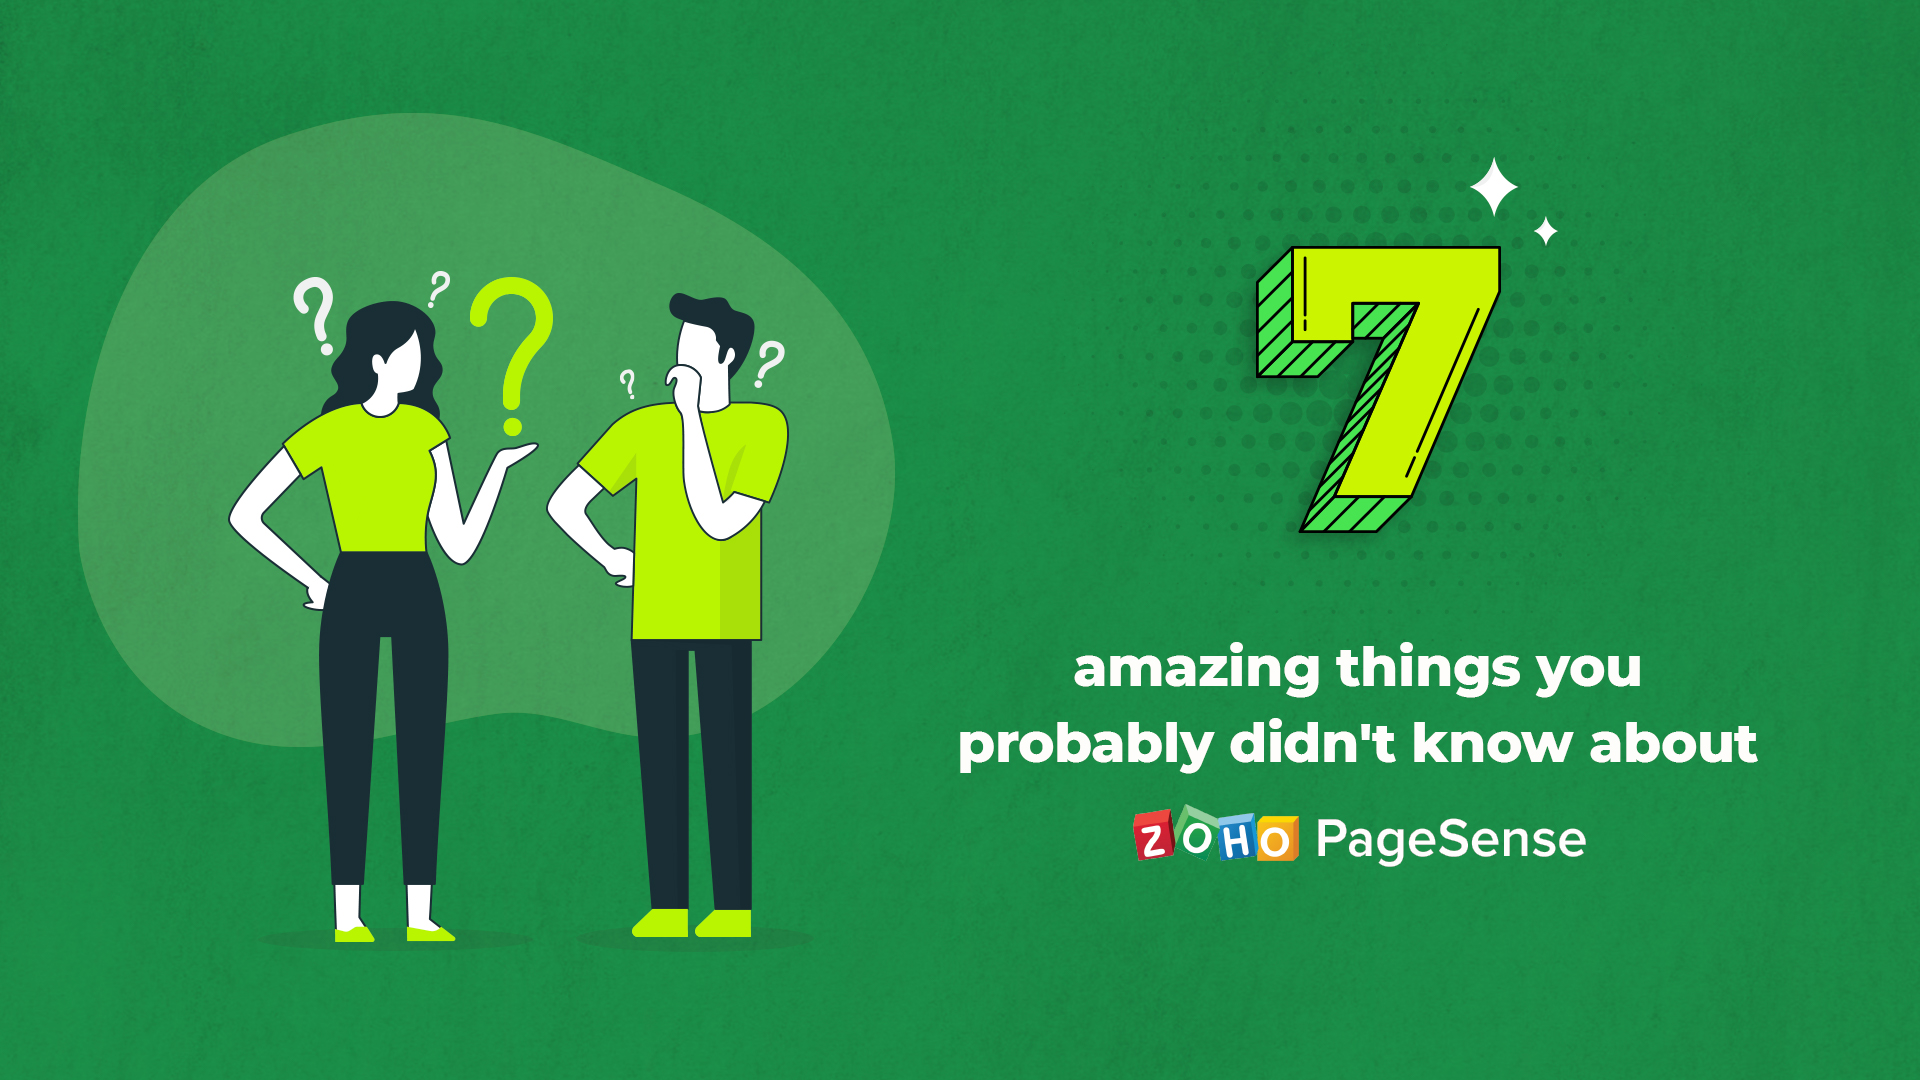 7 Amazing Things You Probably Didn't Know About Zoho PageSense